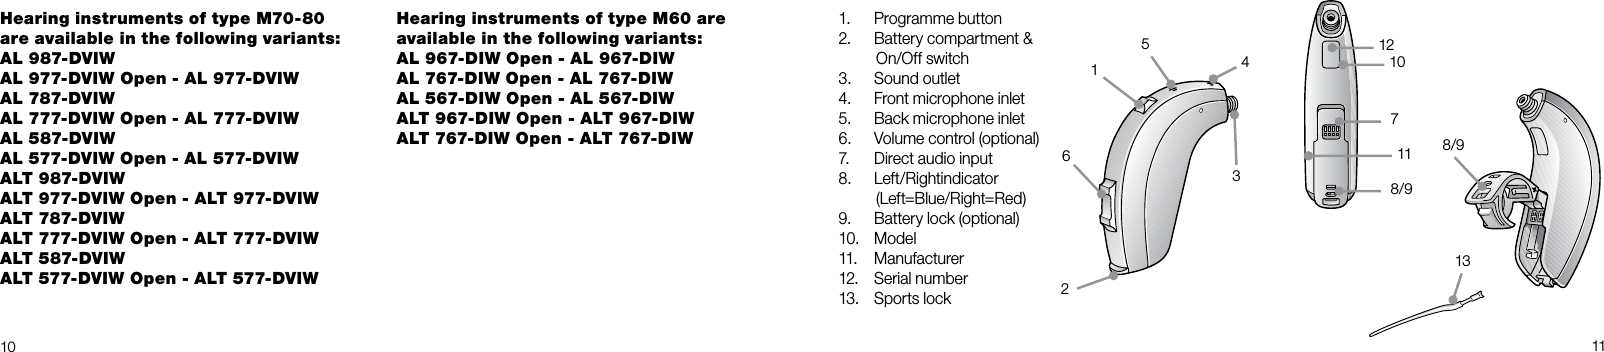 10116154321078/98/9111312Hearing instruments of type M70-80 are available in the following variants: AL 987-DVIWAL 977-DVIW Open - AL 977-DVIWAL 787-DVIWAL 777-DVIW Open - AL 777-DVIWAL 587-DVIWAL 577-DVIW Open - AL 577-DVIWALT 987-DVIWALT 977-DVIW Open - ALT 977-DVIWALT 787-DVIWALT 777-DVIW Open - ALT 777-DVIWALT 587-DVIWALT 577-DVIW Open - ALT 577-DVIWHearing instruments of type M60 areavailable in the following variants: AL 967-DIW Open - AL 967-DIWAL 767-DIW Open - AL 767-DIWAL 567-DIW Open - AL 567-DIWALT 967-DIW Open - ALT 967-DIWALT 767-DIW Open - ALT 767-DIWProgramme button1. Battery compartment &amp;  2.  On/Off switchSound outlet3. Front microphone inlet4. Back microphone inlet5. Volume control (optional)6. Direct audio input7.  Left/Rightindicator  8.  (Left=Blue/Right=Red)Battery lock (optional)9. Model10. Manufacturer11. Serial number12. Sports lock13. 